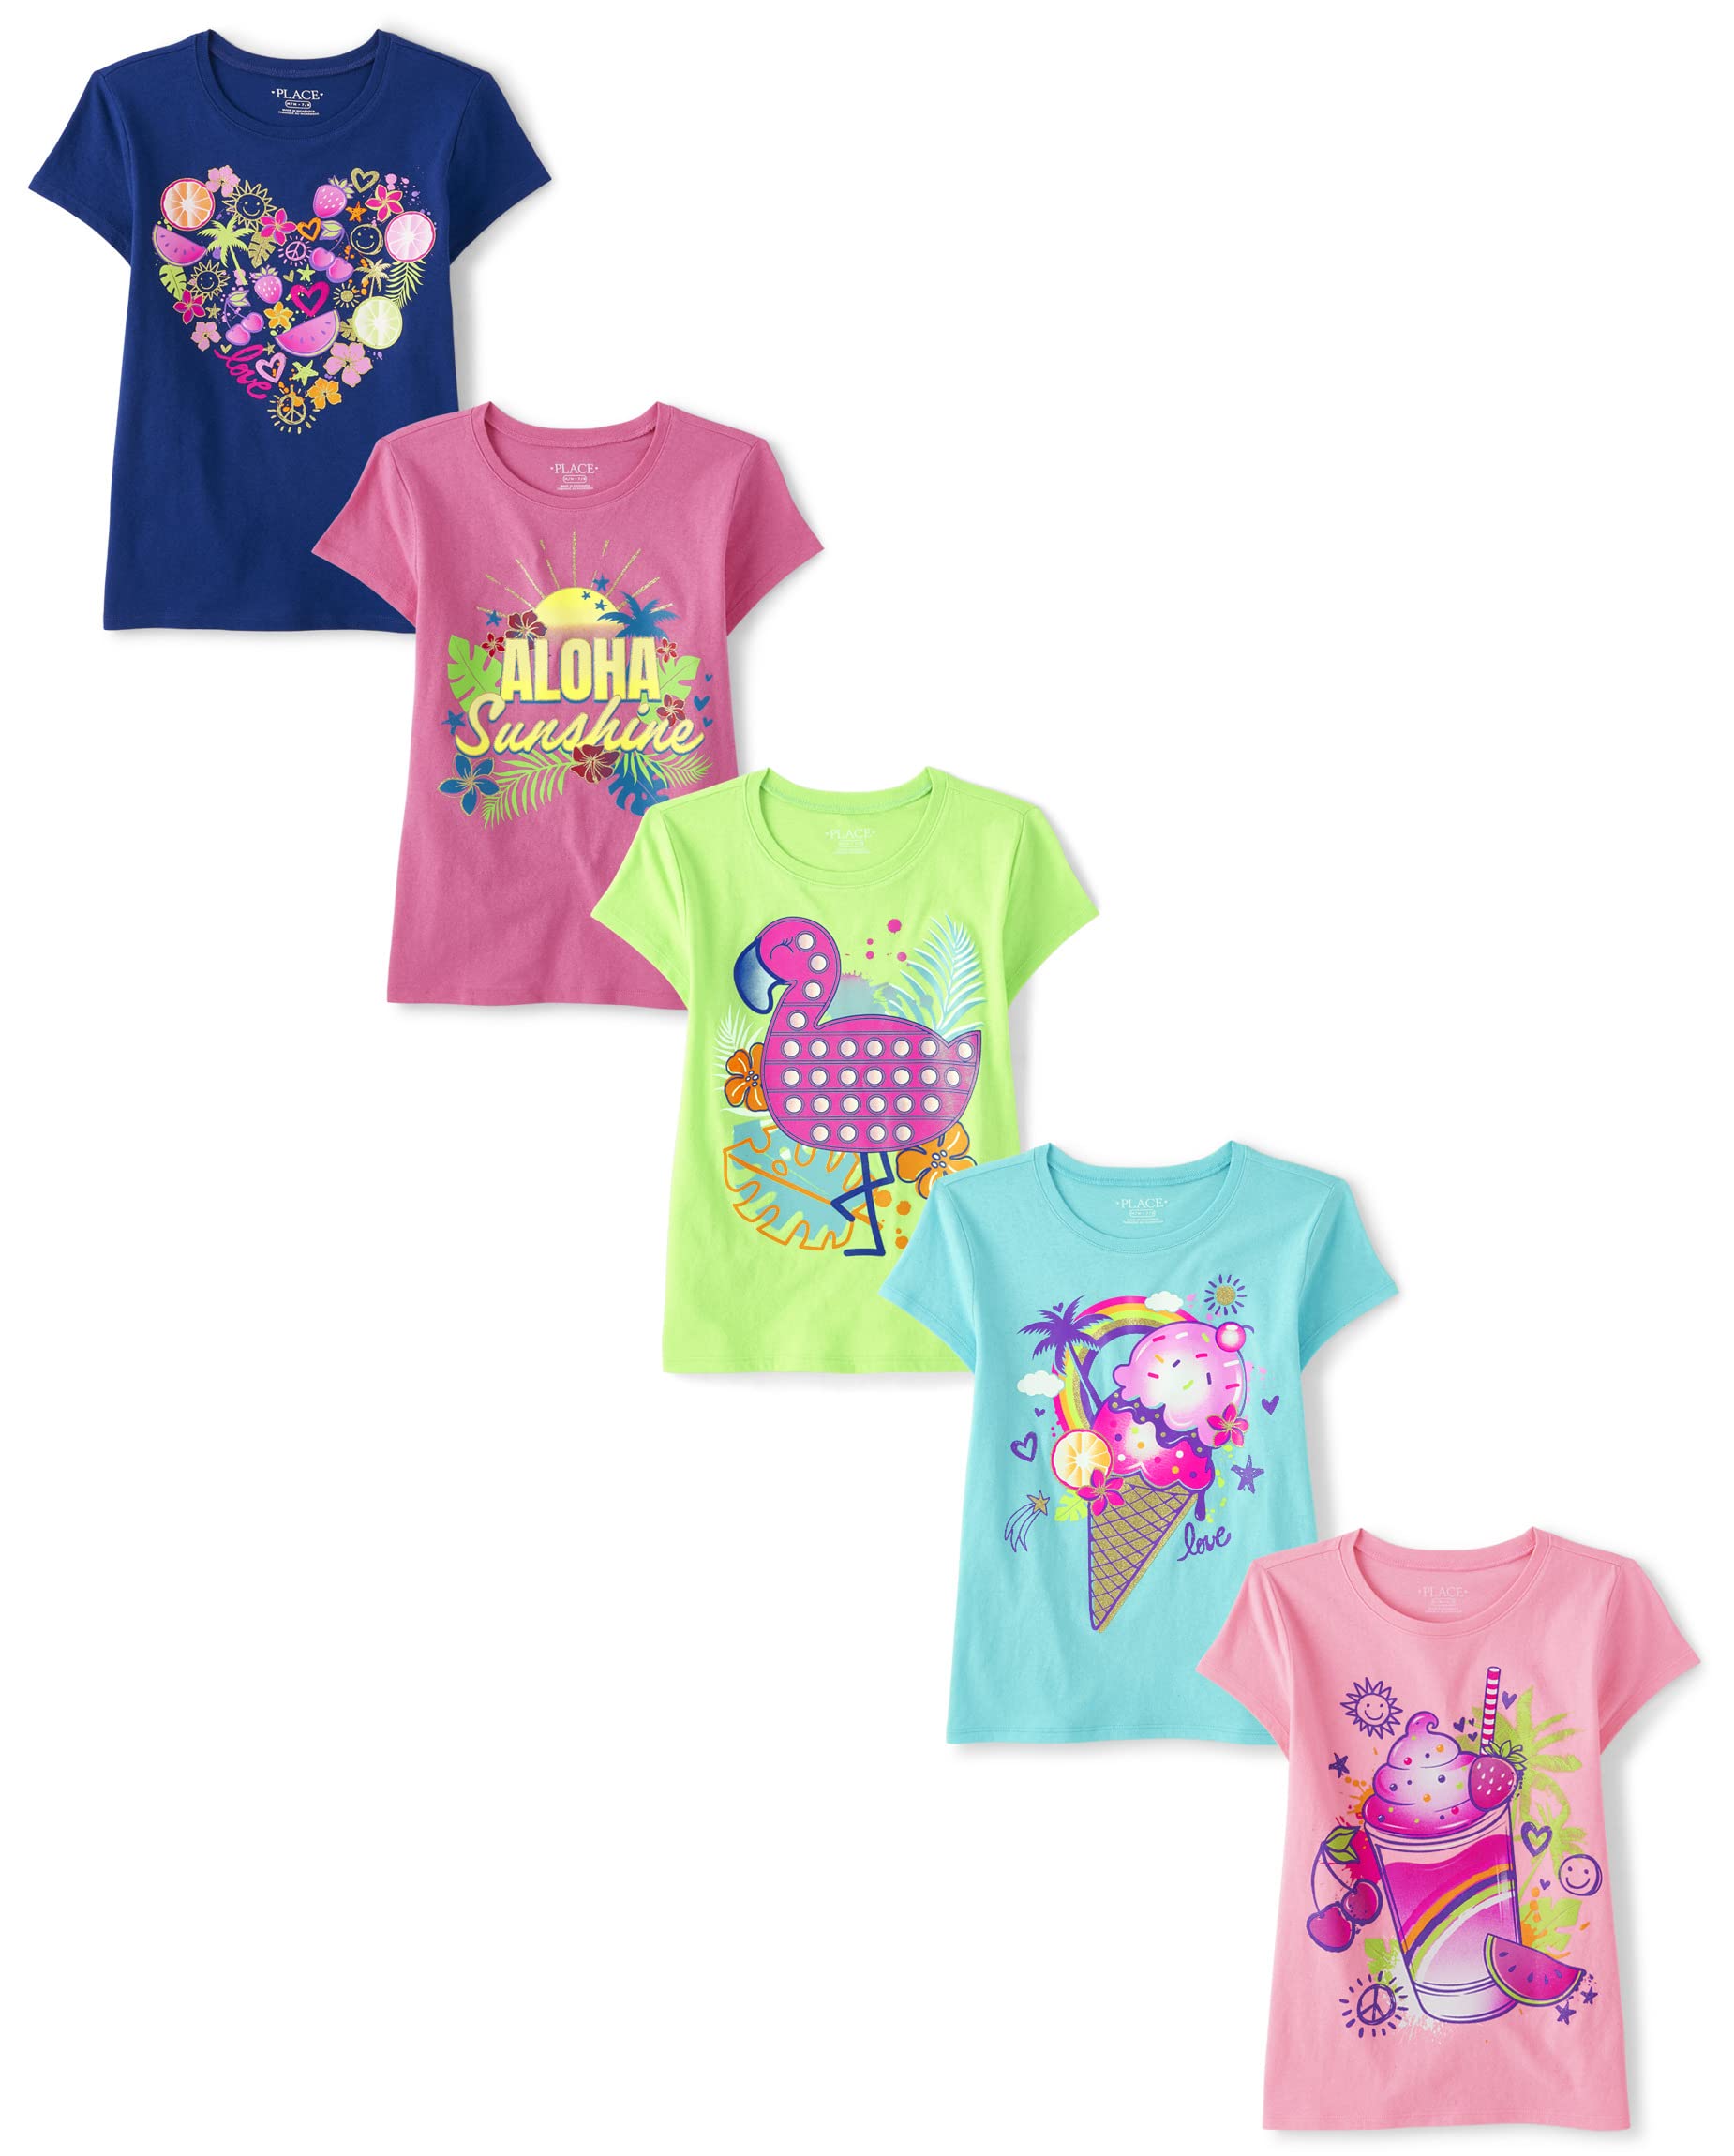 The Children's Place Girls' Short Sleeve Multi Color Graphic T-Shirt, 5 Pack